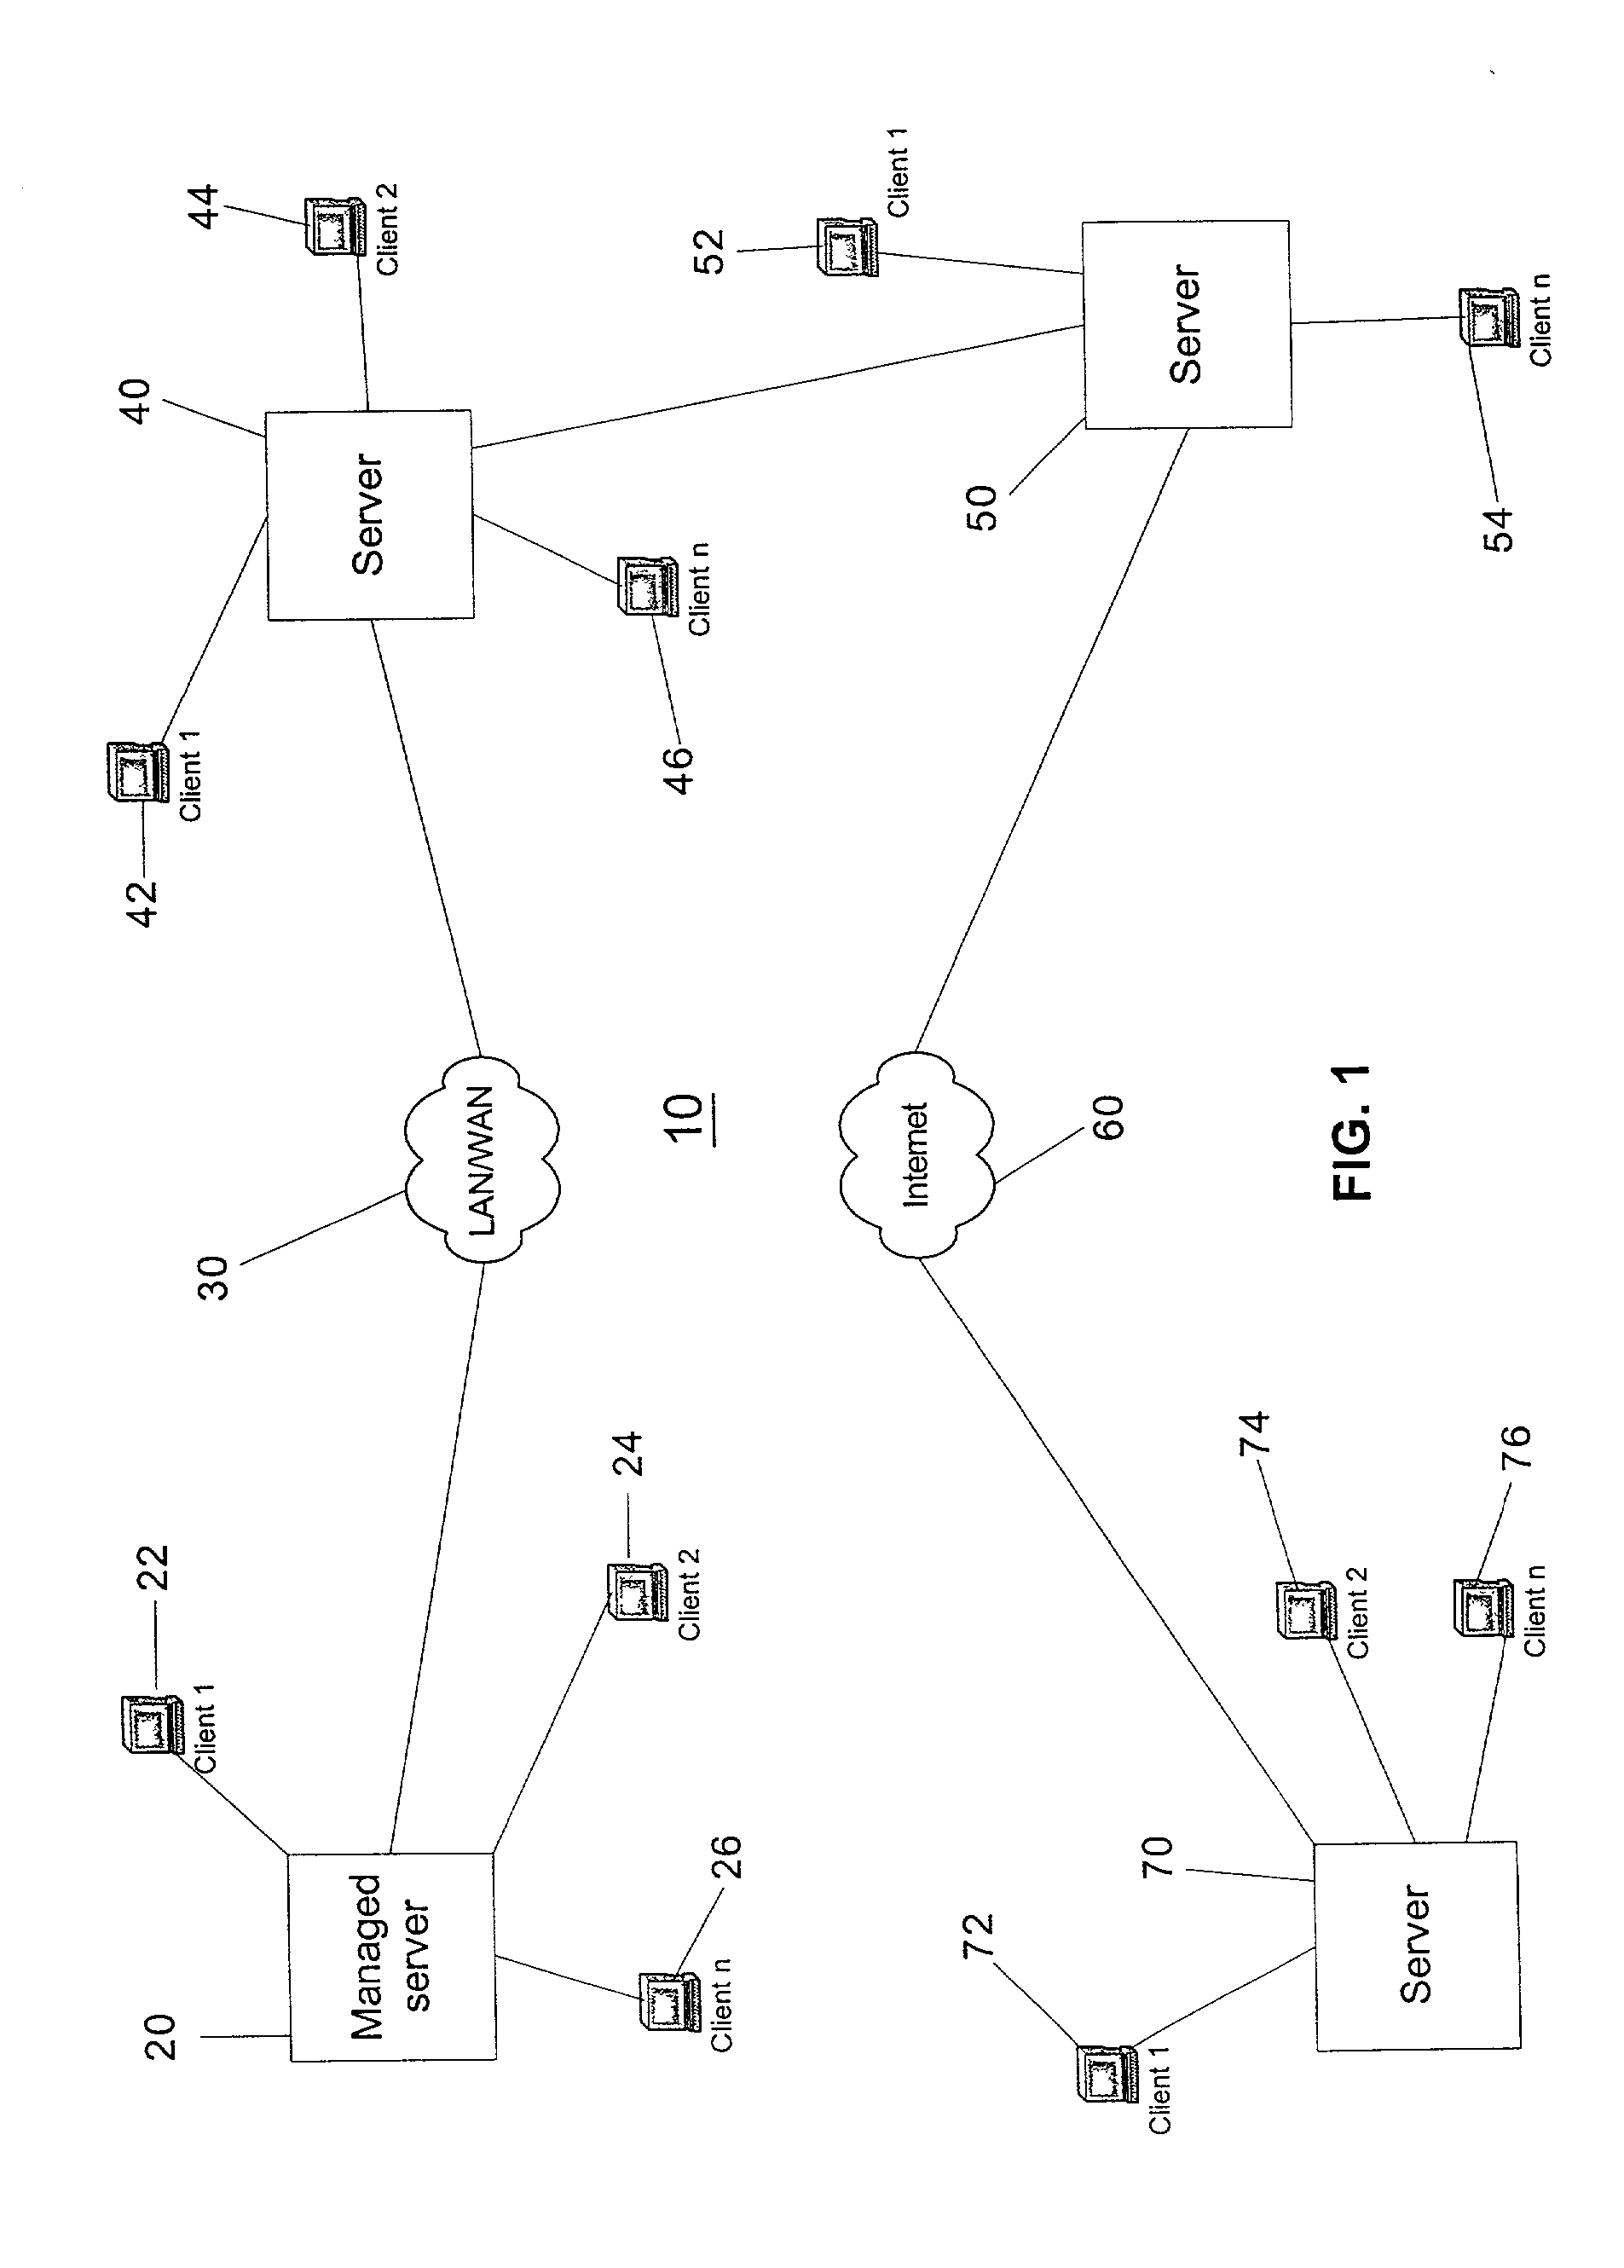 Method and apparatus for emulating an OS-supported communication device to enable remote debugging